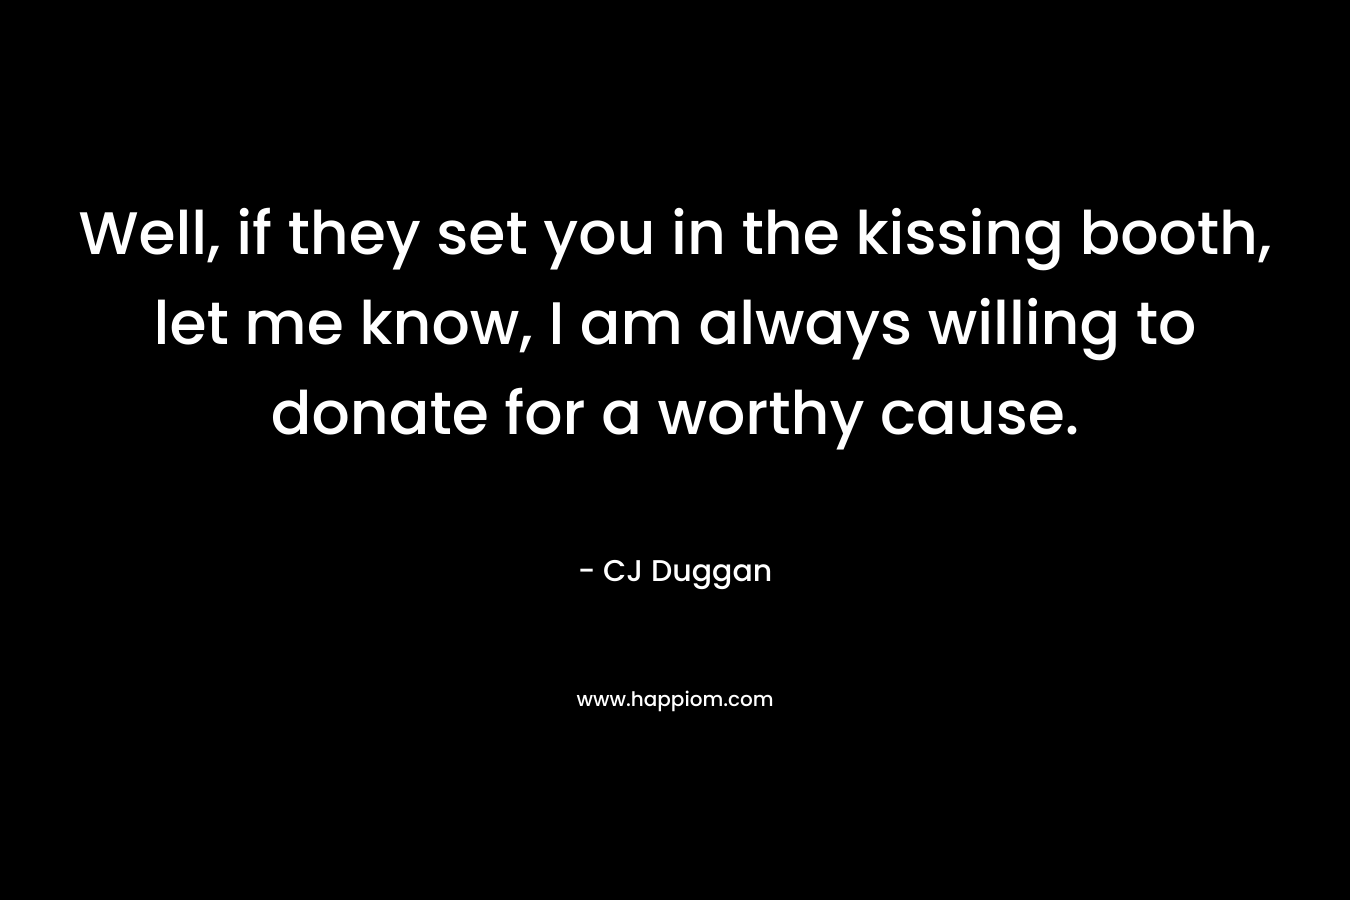 Well, if they set you in the kissing booth, let me know, I am always willing to donate for a worthy cause.